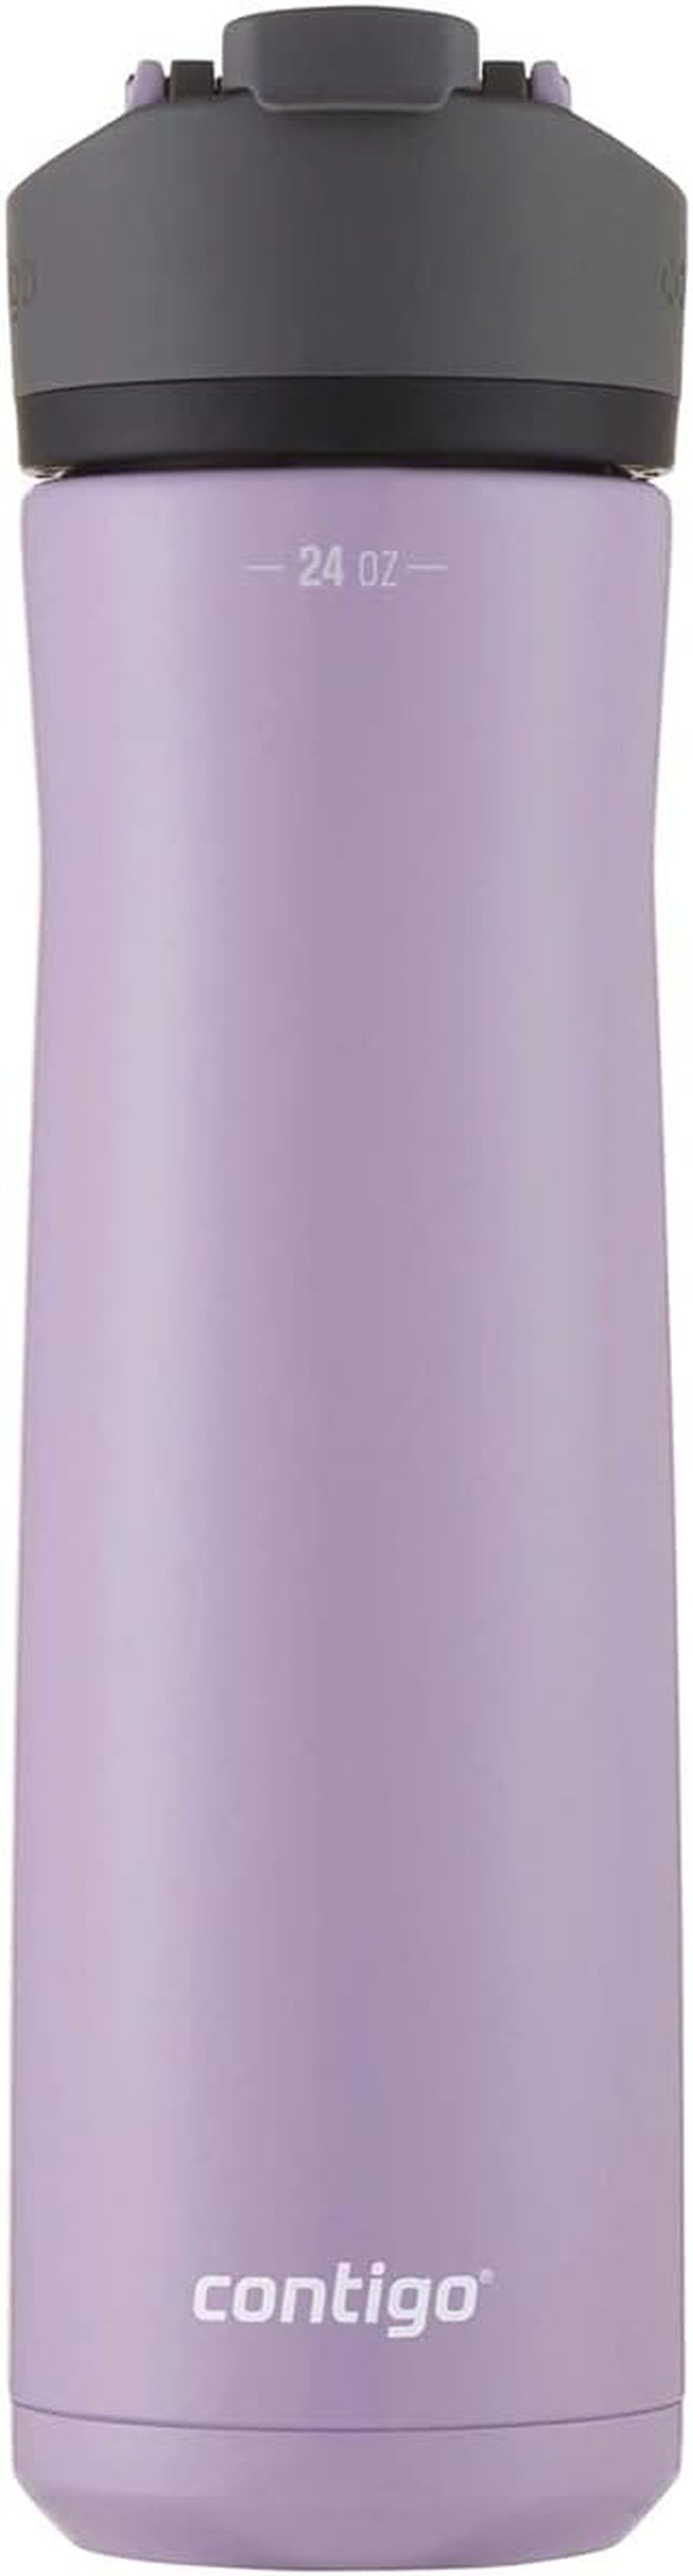 Cortland Chill 2.0 Stainless Steel Vacuum-Insulated Water Bottle with Spill-Proof Lid